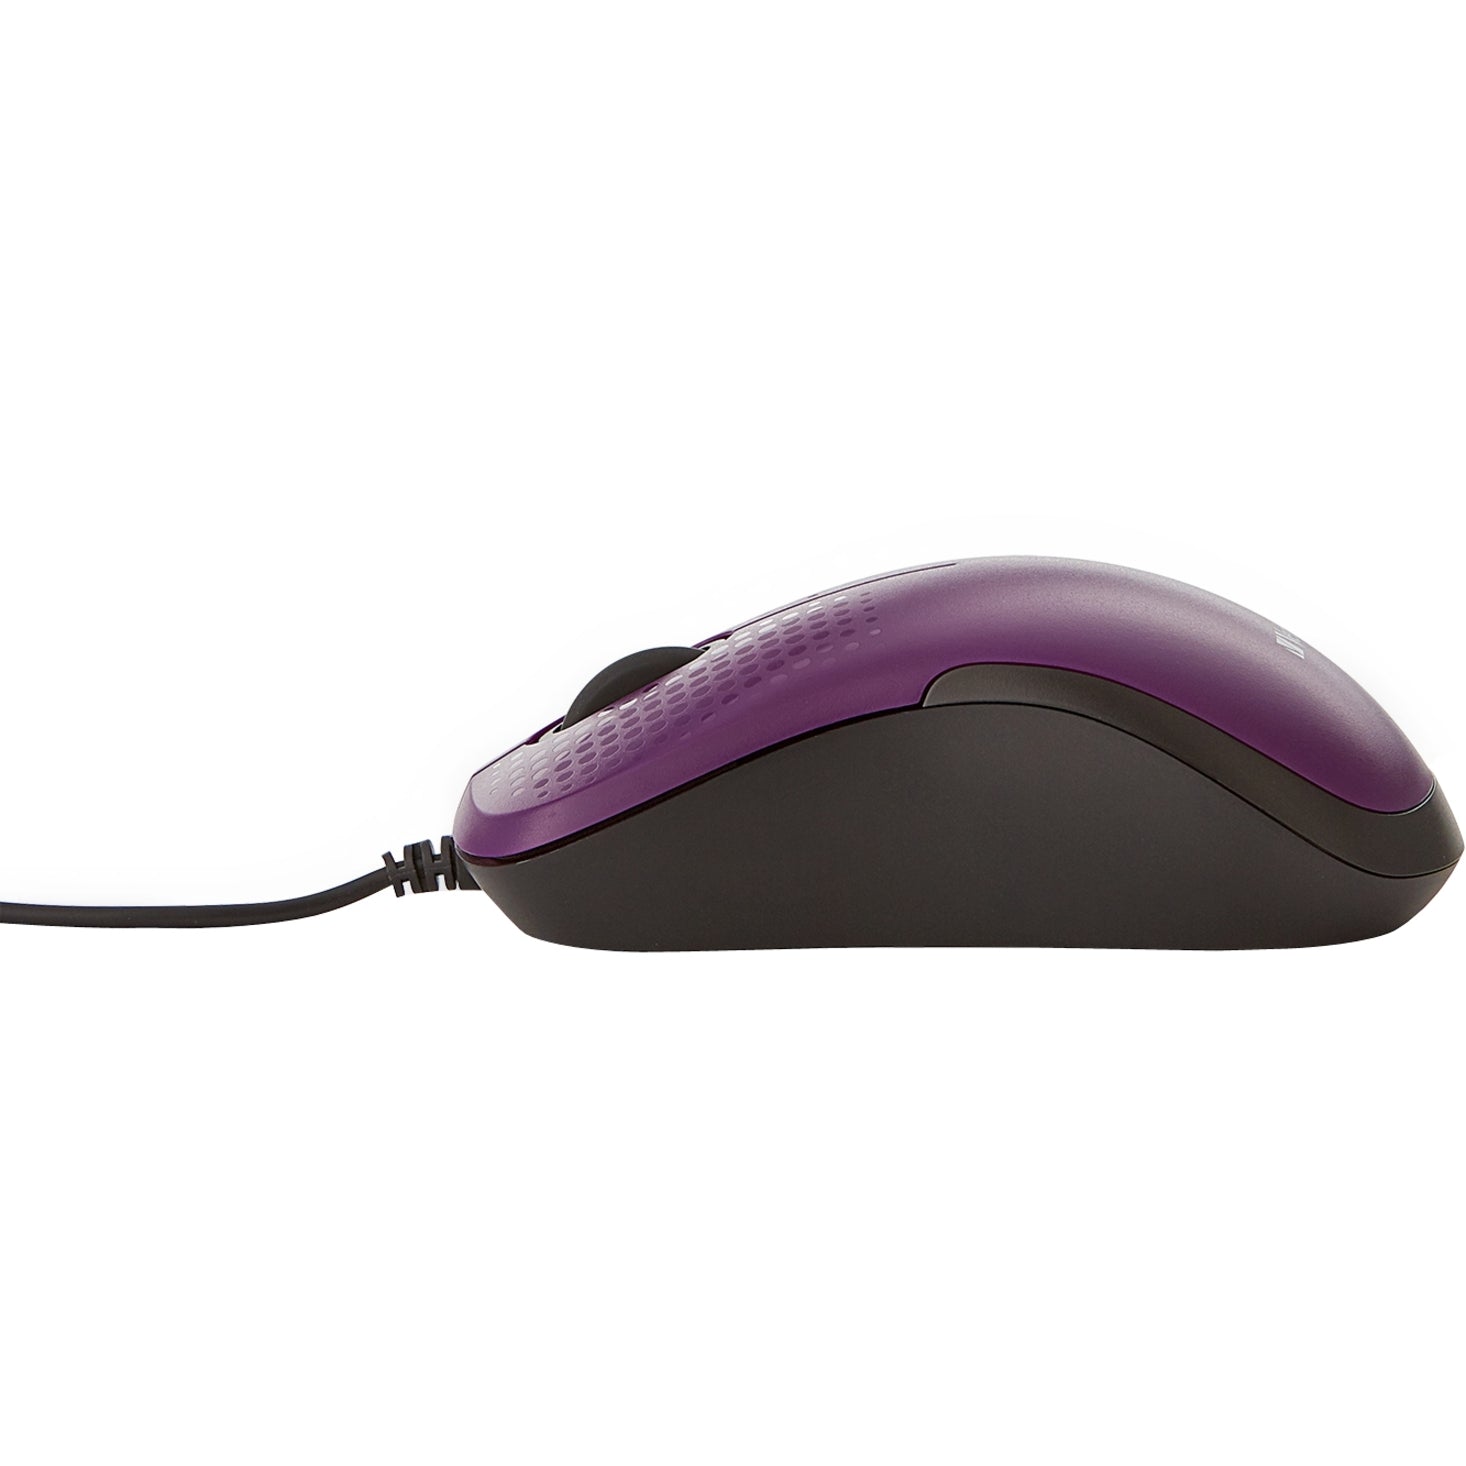 Verbatim 70235 Silent Corded Optical Mouse - Purple, 3 Buttons, 4.92 ft Cable